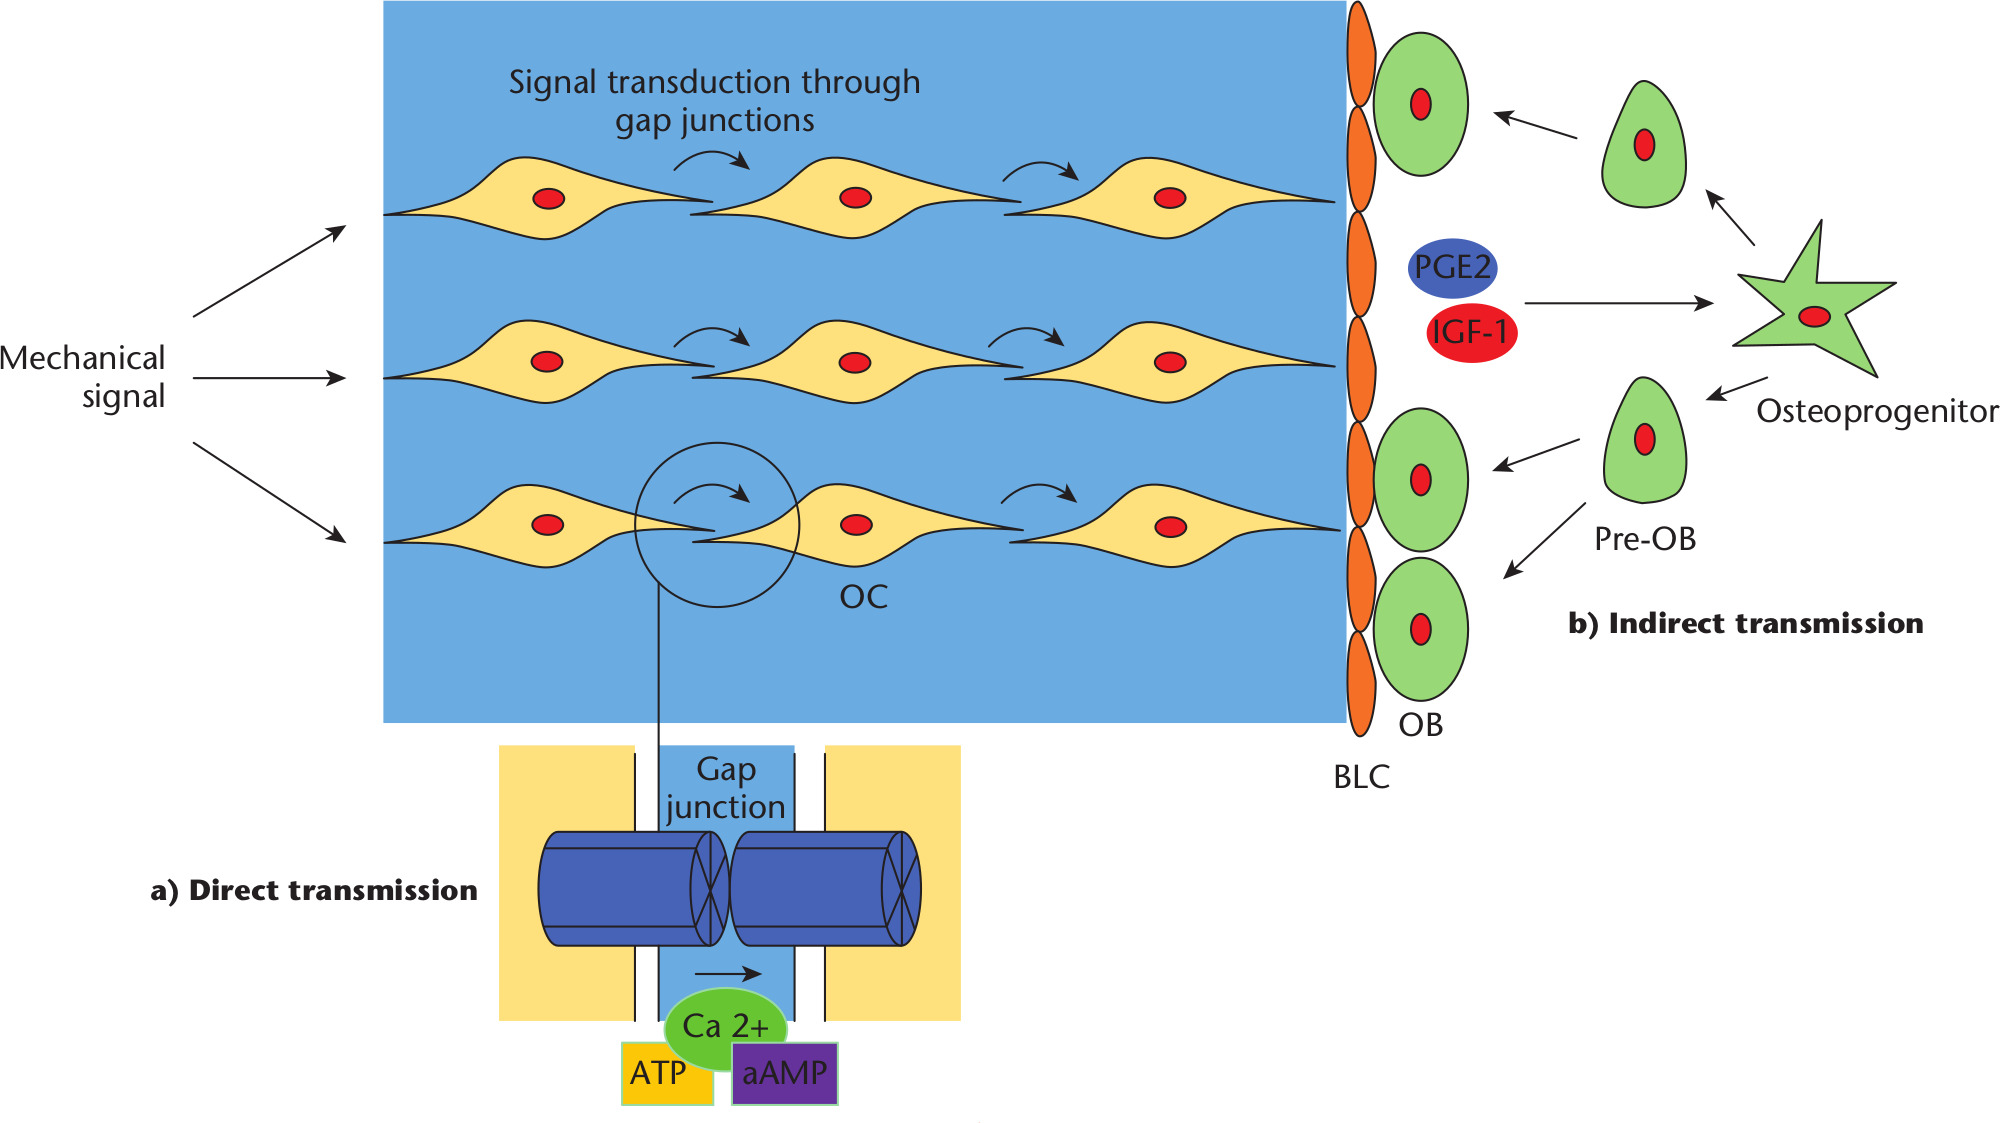 Fig. 4 
            Transmission of signal. a) Direct transmission: gap junctions form between adjacent connexins on cell membranes, allowing the passage of small molecules such as calcium, adenosine triphosphate (ATP) and cyclic adenosine monophosphate (cAMP). This propagates mechanotransductive signals through the network of osteocytes to the bone lining cells (BLCs). b) Indirect transmission: BLCs release paracrine factors including prostaglandin E2 (PGE2) and insulin-like growth factor 1 (IGF-1), stimulating osteoprogenitor cells to differentiate in preosteoblasts and subsequently osteoblasts. These new osteoblasts attach to the bone surface and produce new bone matrix.
            Ca2+, calcium; OB, osteoblast; OC, osteoclast. Adapted with permission from Duncan RL, Turner CH. Mechanotransduction and the functional response of bone to mechanical strain. Calcif Tissue Int. 1995;57(5):344-358.
          